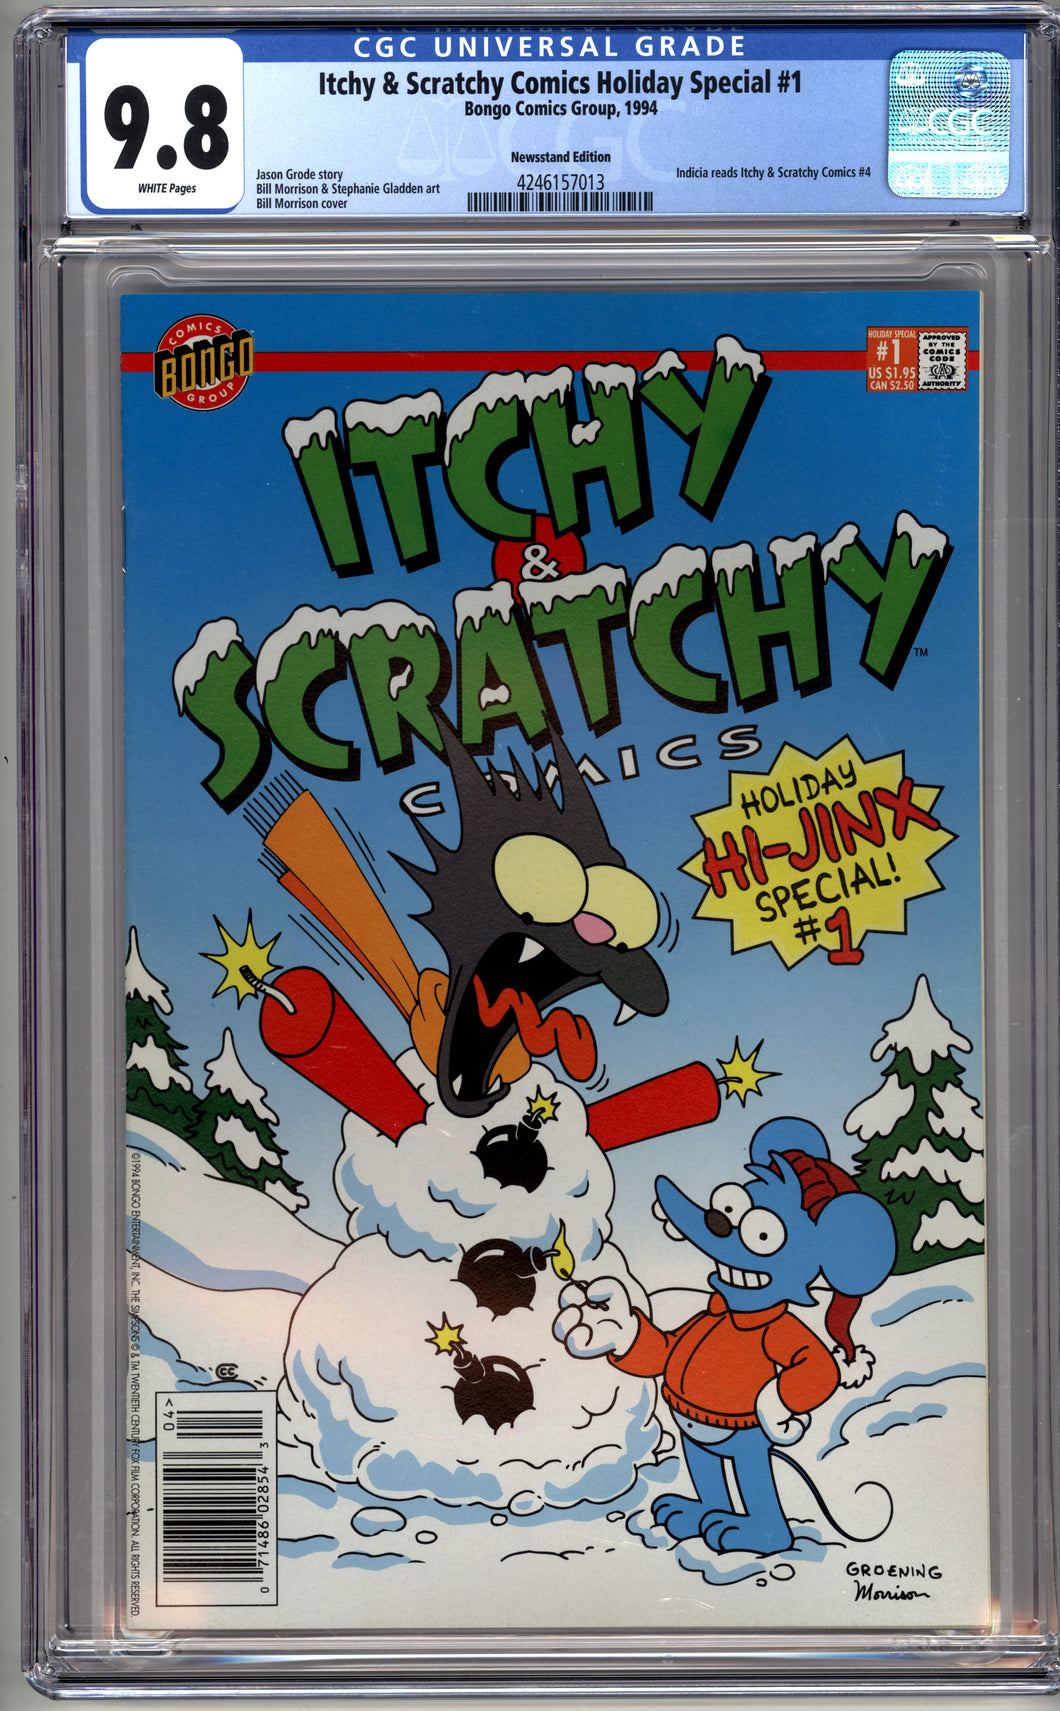 ITCHY & SCRATCHY COMICS HOLIDAY SPECIAL #1 (Bongo 1994) CGC 9.8 NM/M